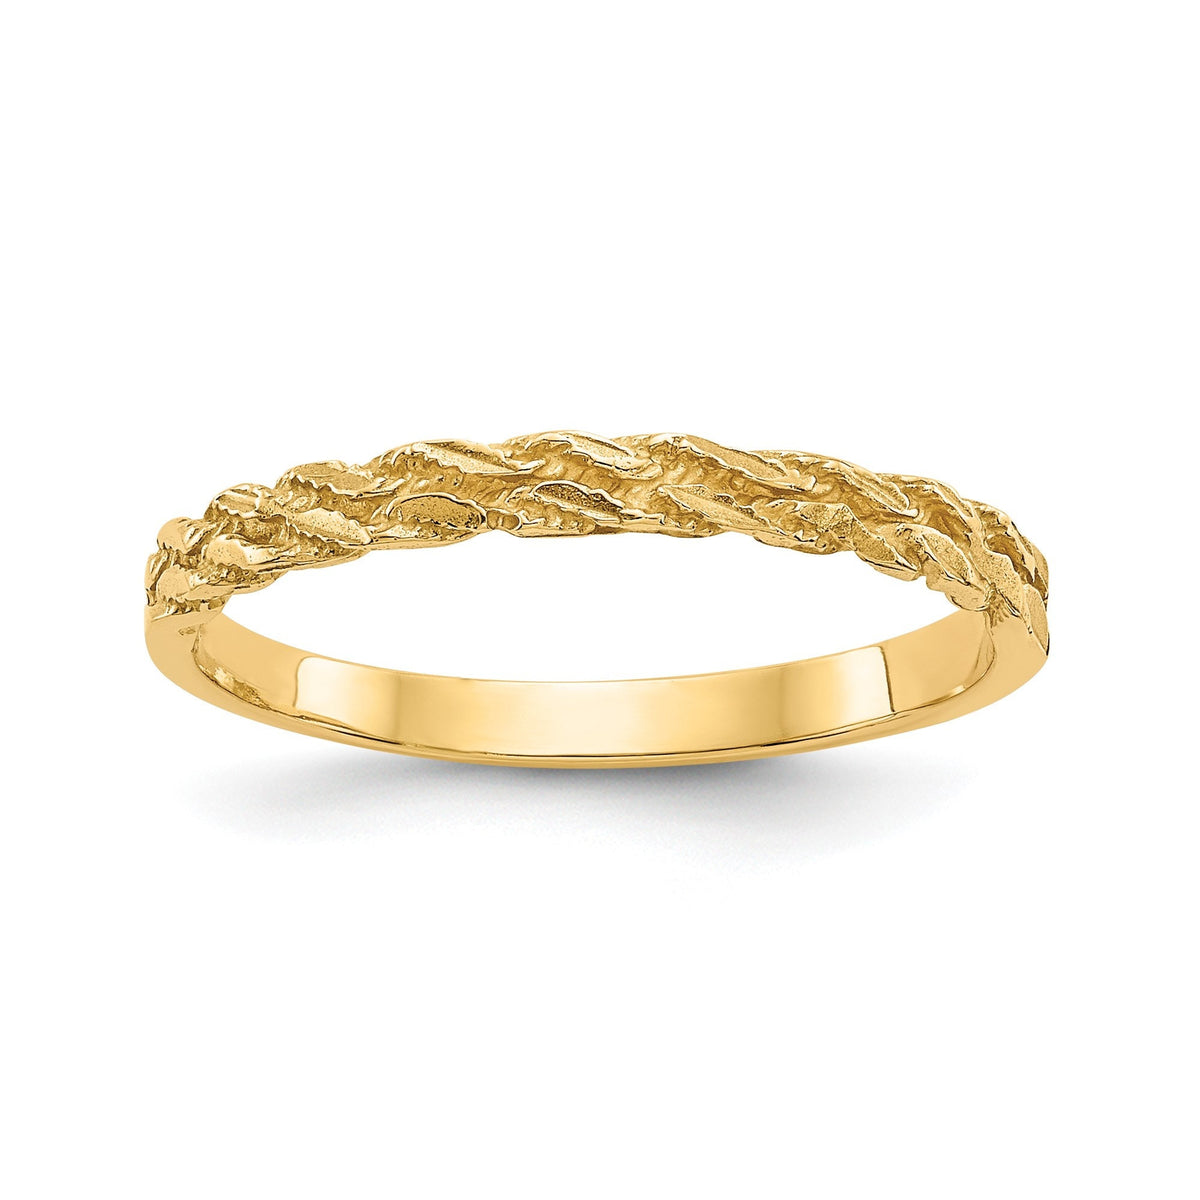 14k Yellow Gold Diamond-cut Textured Rope Band Ring 3mm- Made in USA - Gift Box Included - Size 4.75-8.75  Engraveable Ring